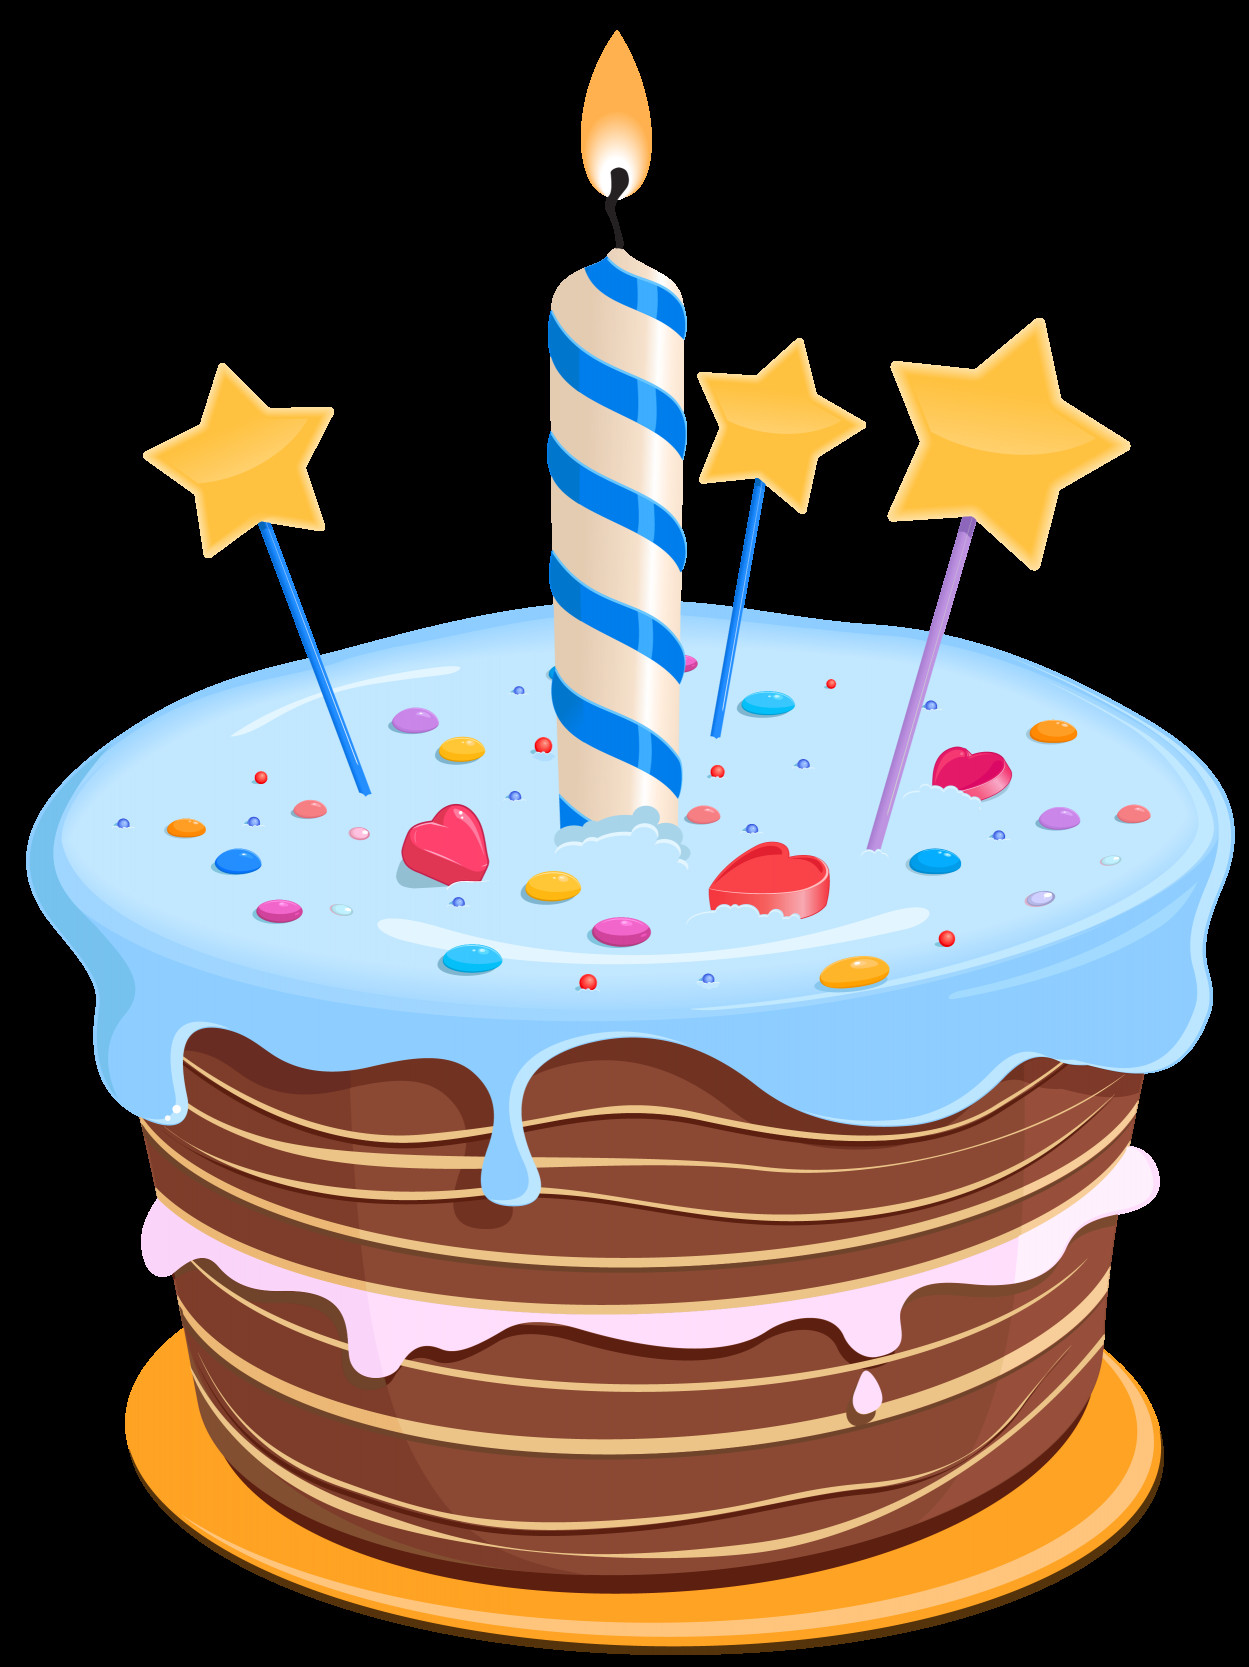 Birthday Cake Clipart
 Set these cute birthday cake clipart as desktop profile in